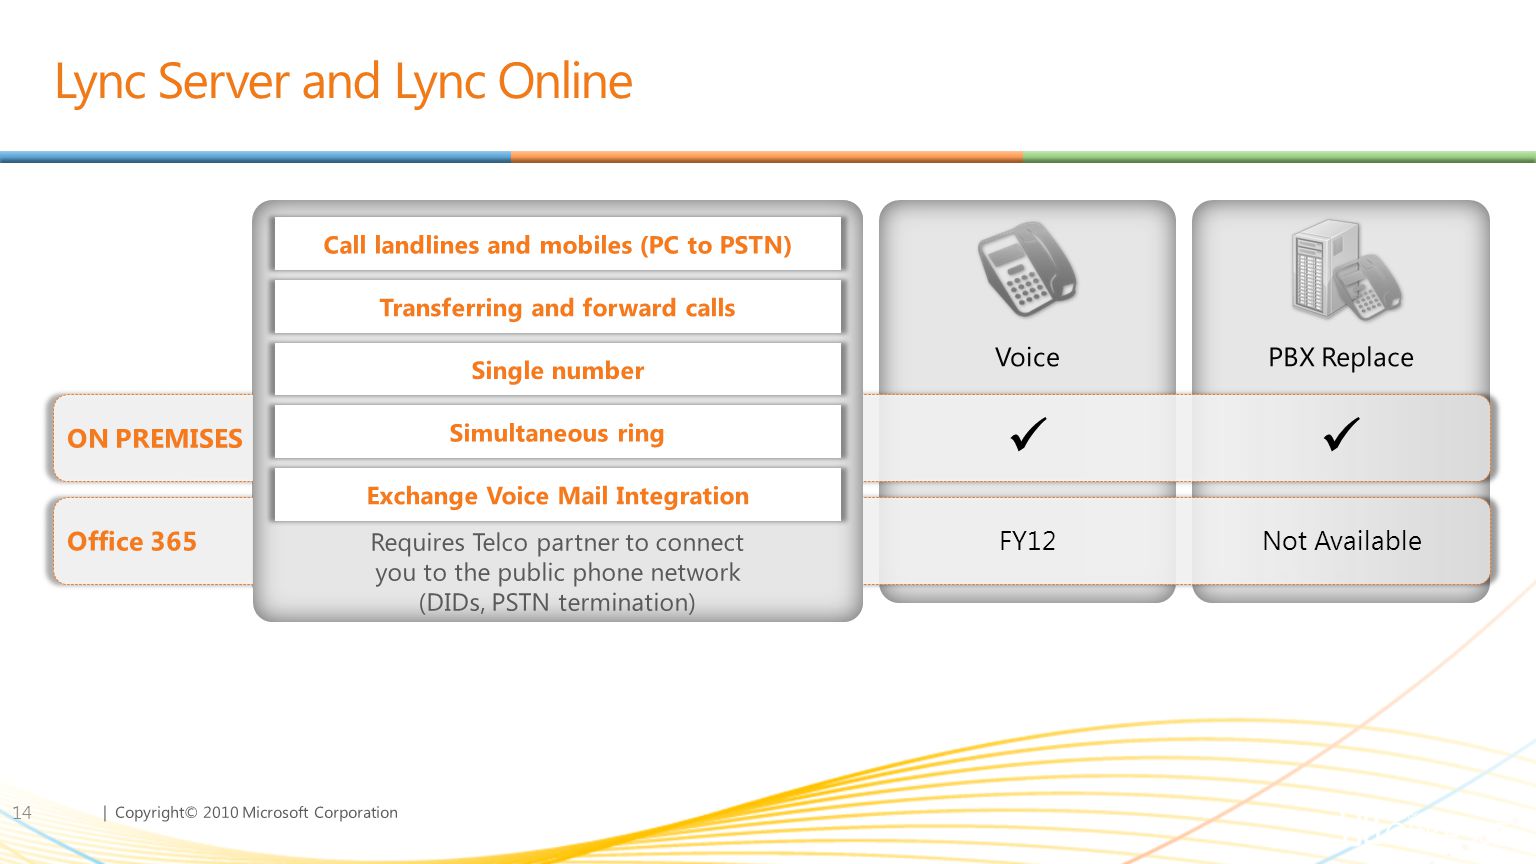 | Copyright© 2010 Microsoft Corporation Lync Server and Lync Online 14 Basic Messaging ConferencingVoice PBX Replace Not AvailableFY12